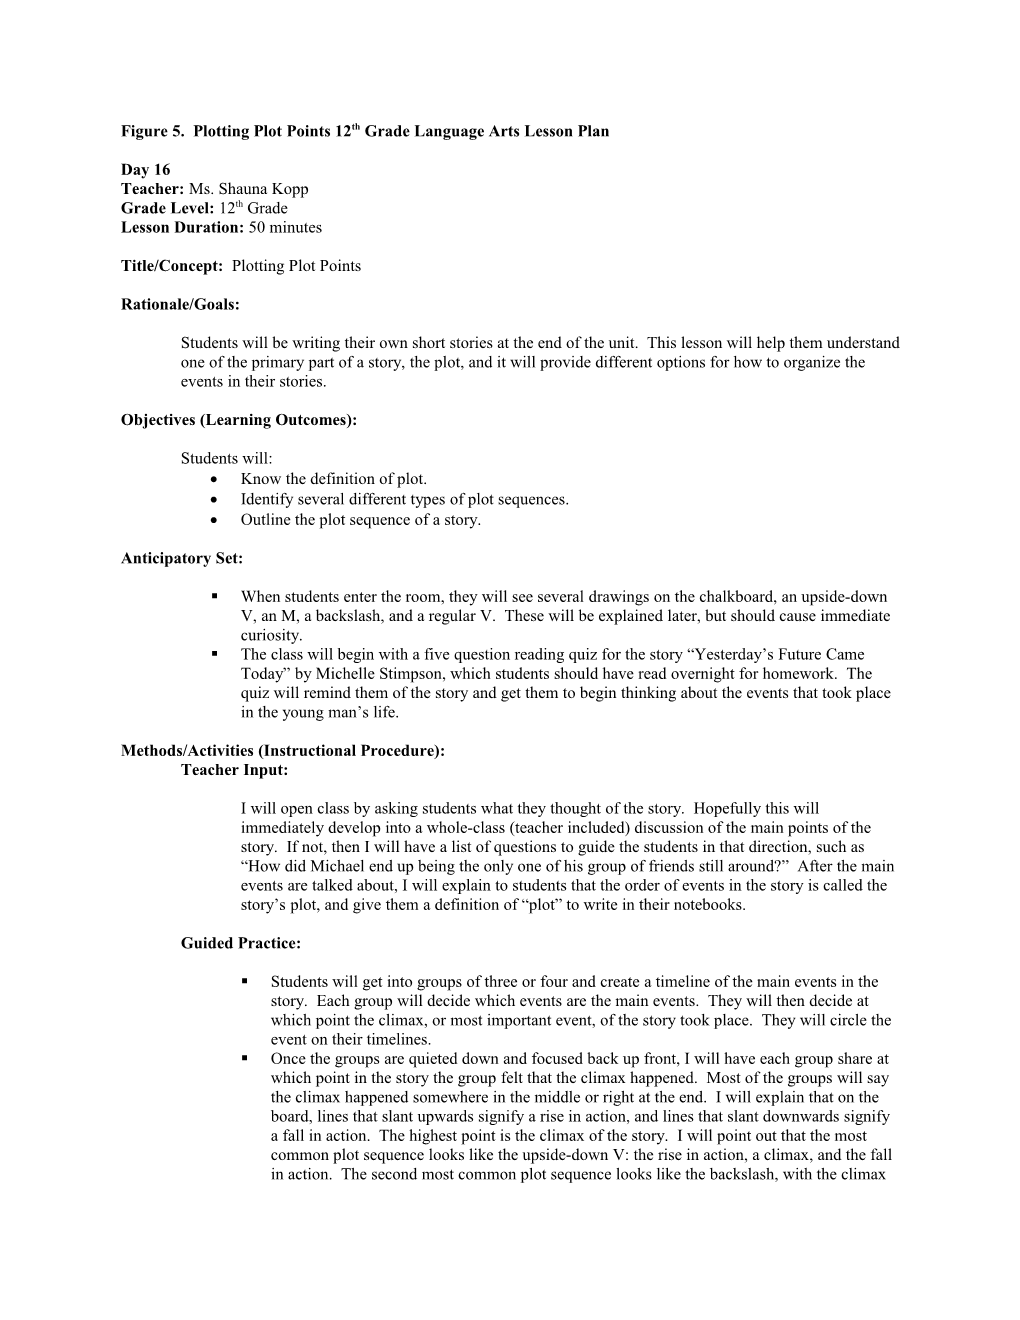 Lesson Plan Template s25